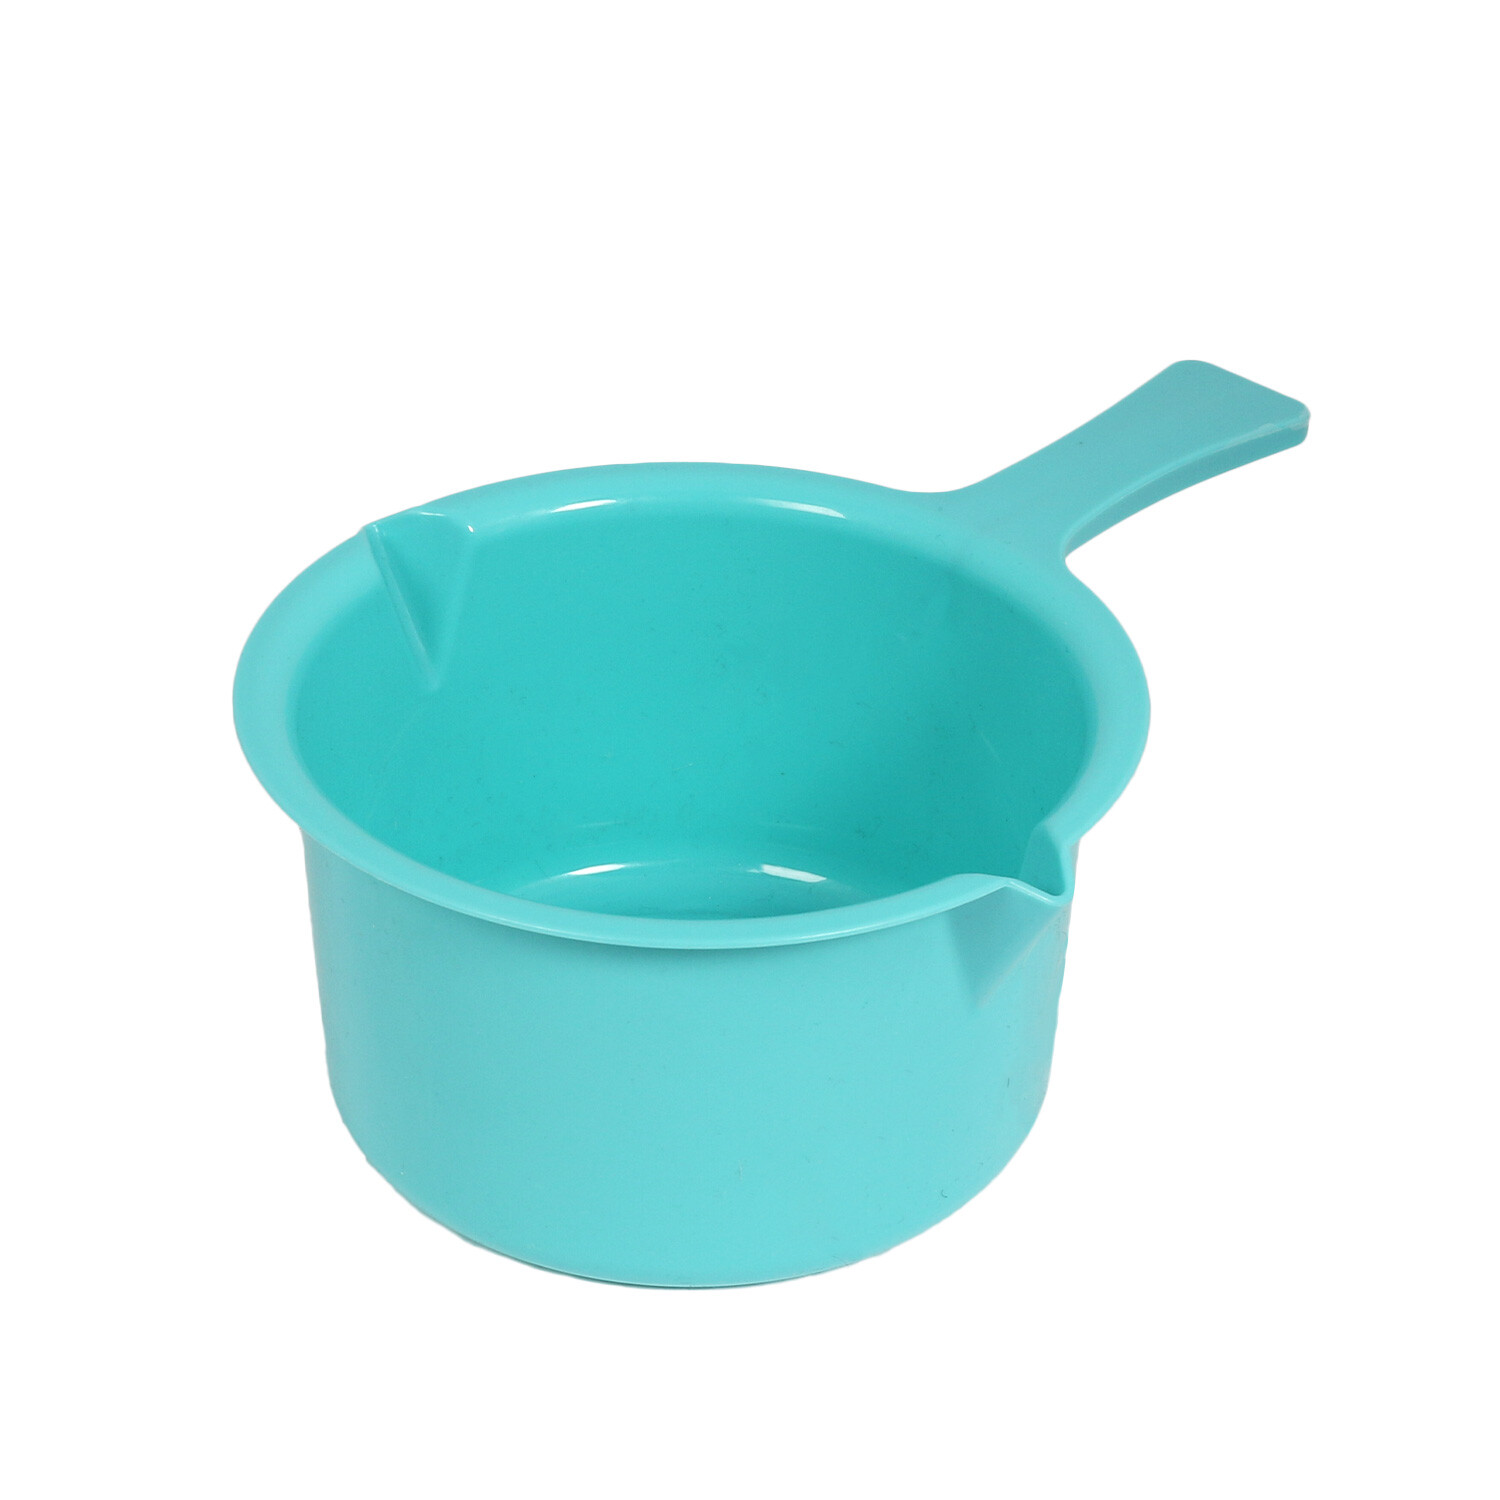 Microwaveable Saucepan - Without Lid Image